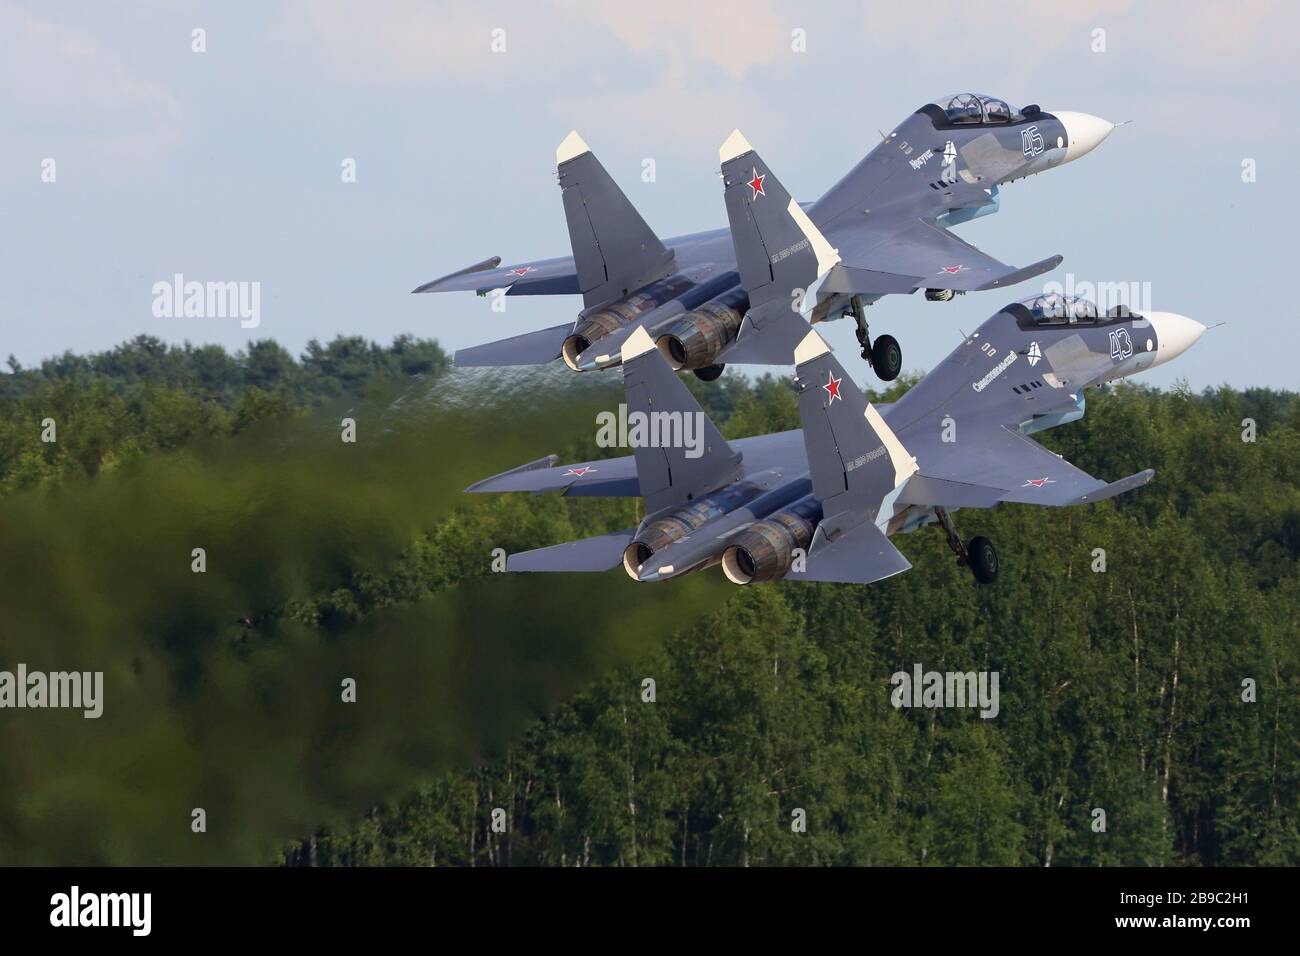 Sukhoi Su-30SM jet fighters of the Russian Navy. Stock Photo